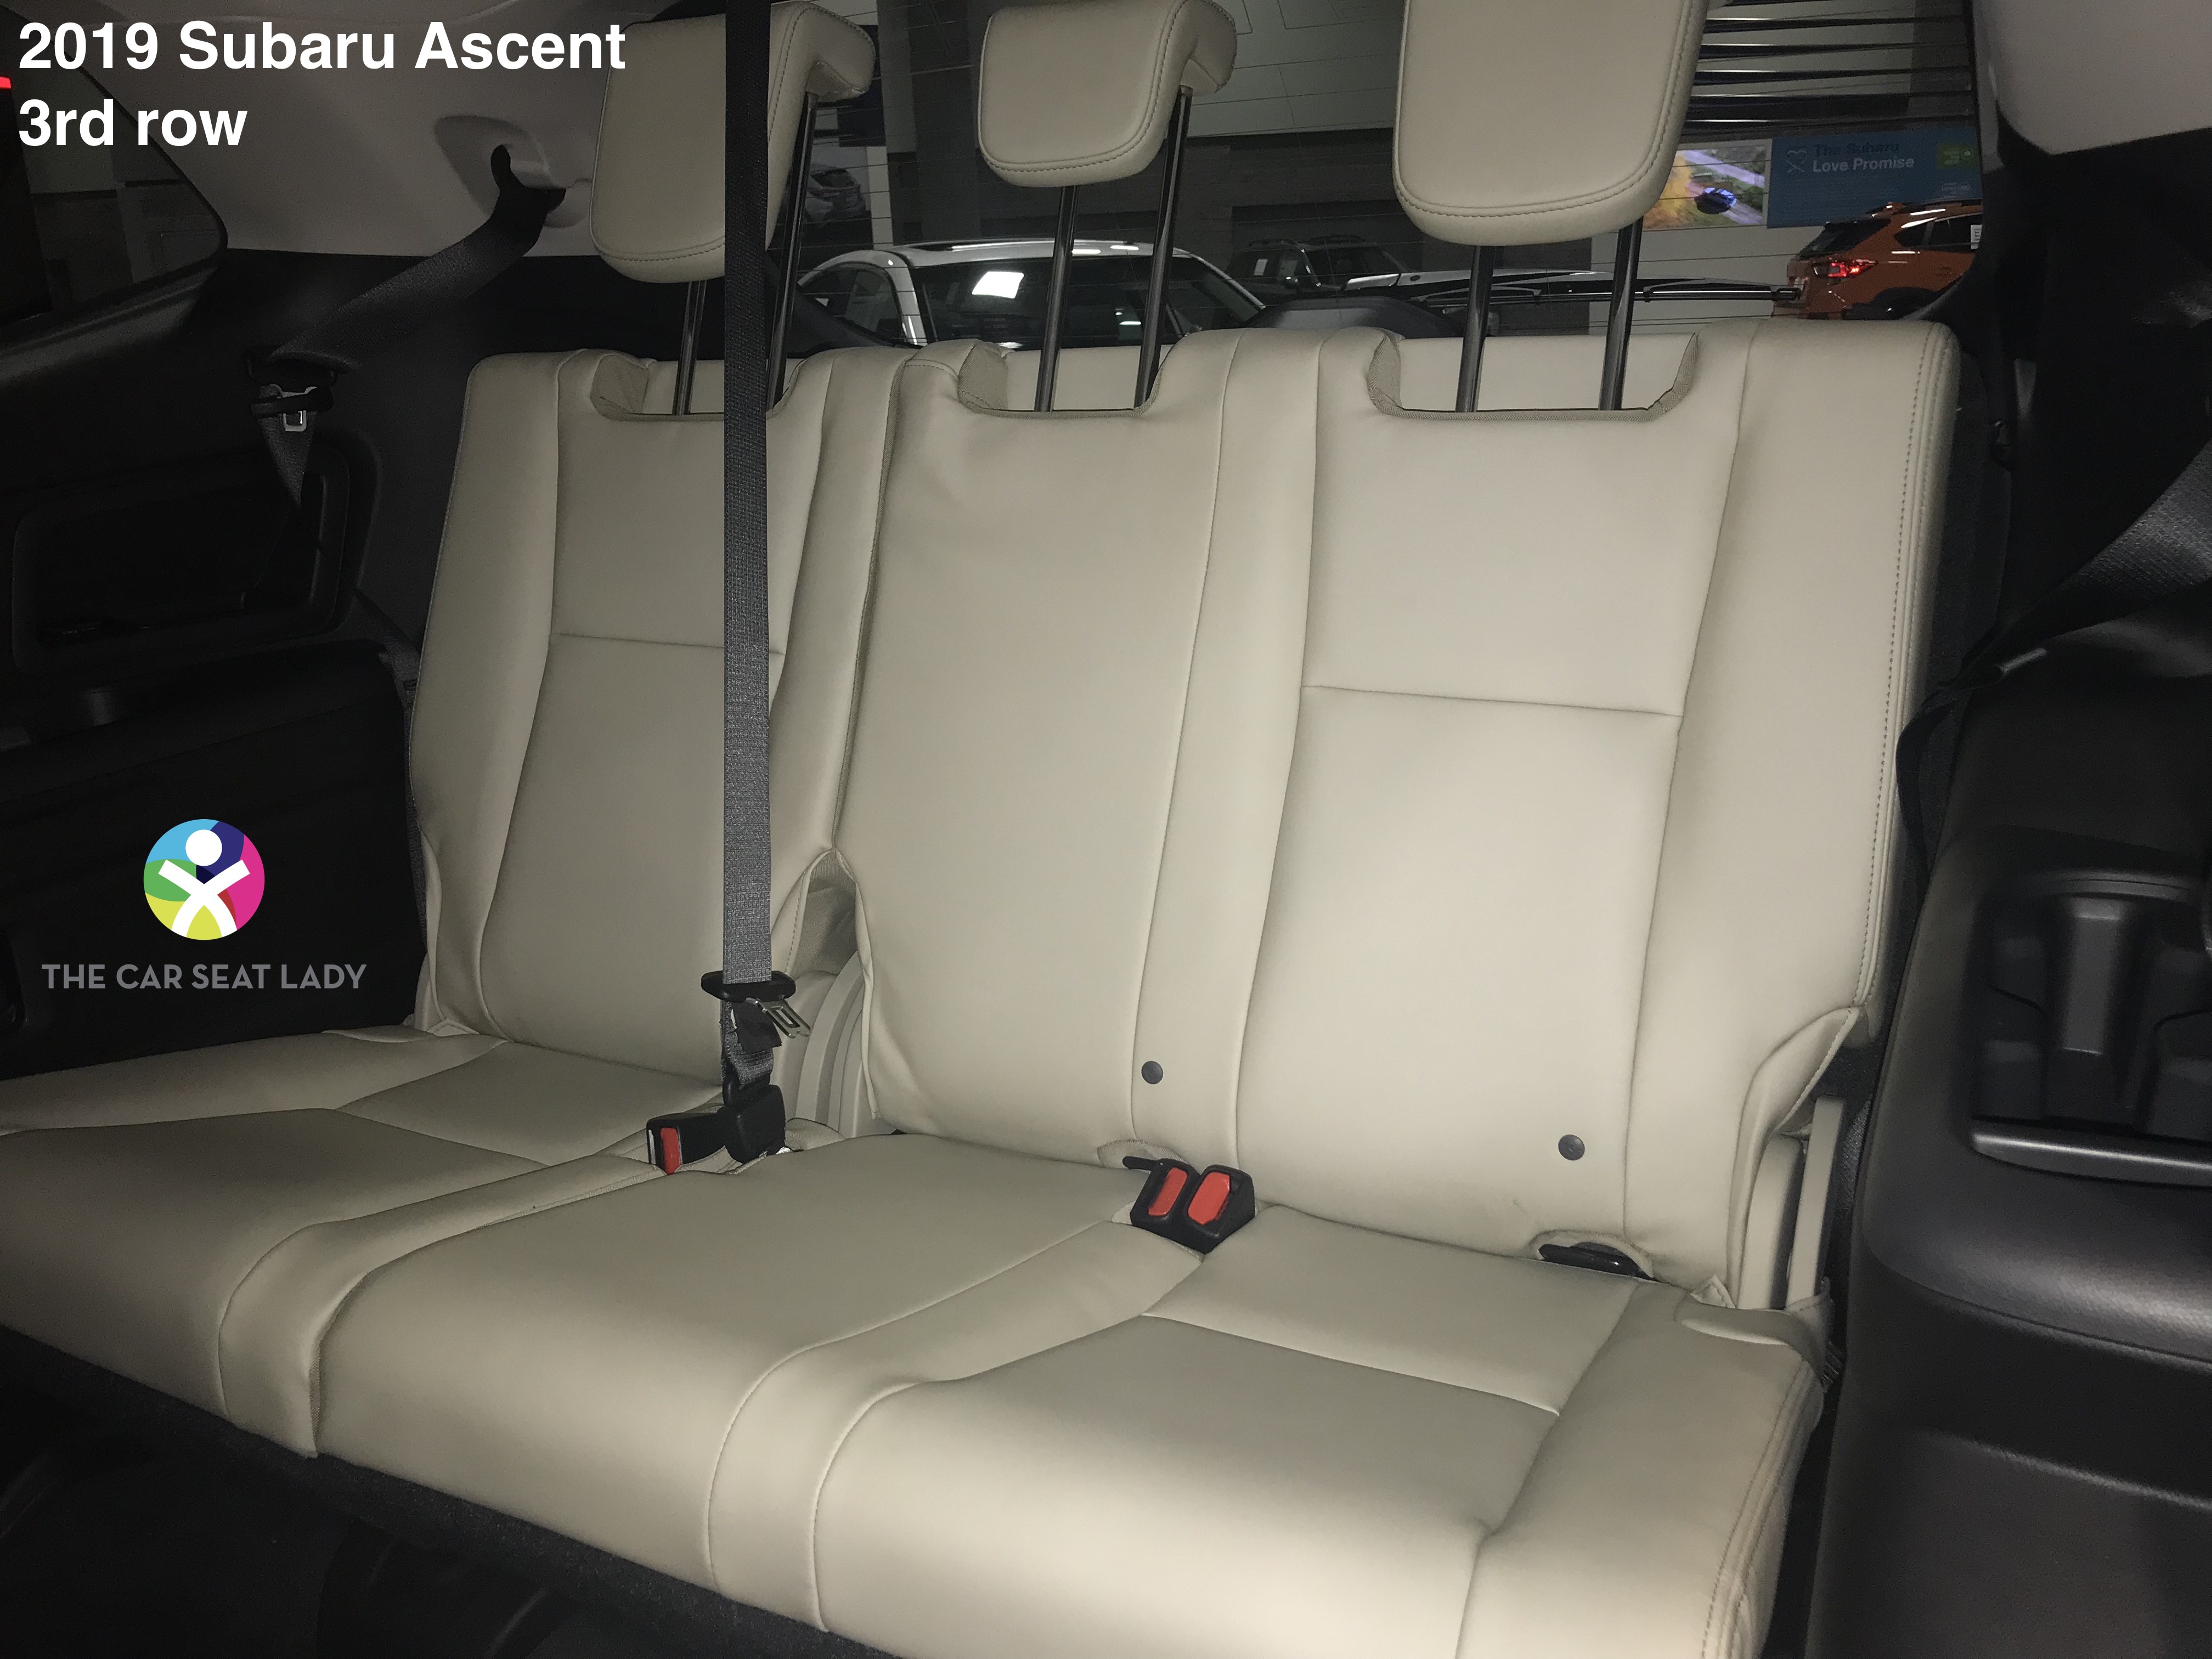 https://thecarseatlady.com/wp-content/uploads/2018/01/2019-Subaru-Ascent-3rd-row.jpg